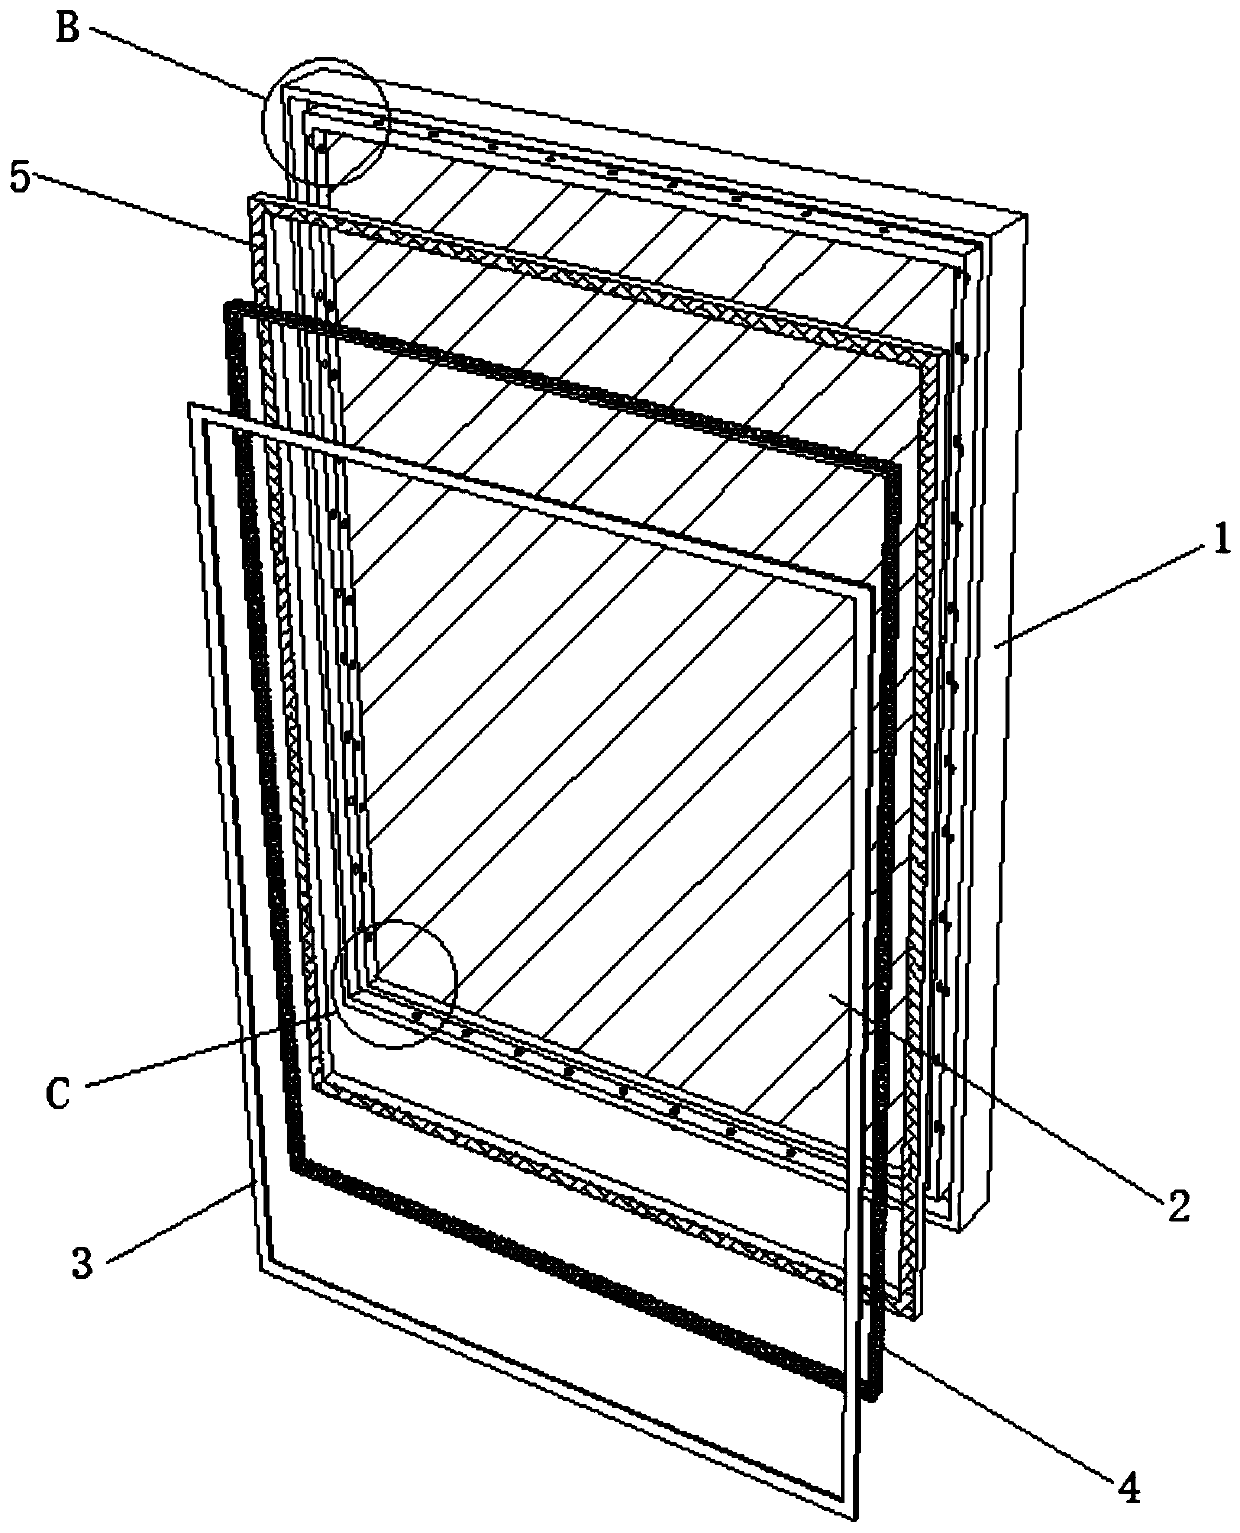 An aluminum alloy door and window with concealed micro drainage